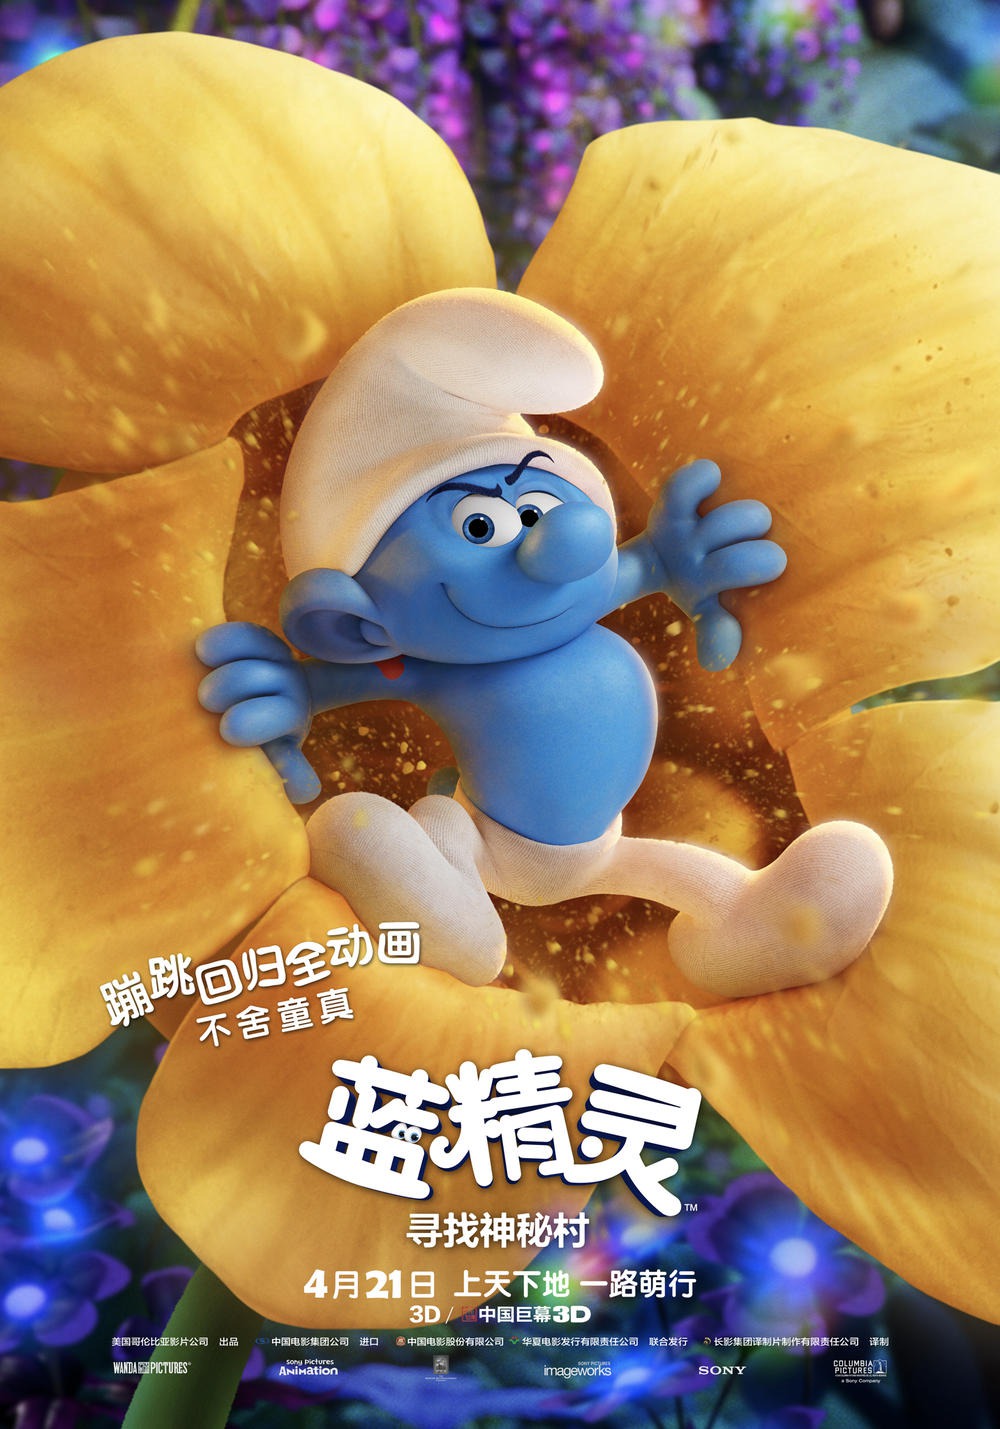 Extra Large Movie Poster Image for Smurfs: The Lost Village (#8 of 13)